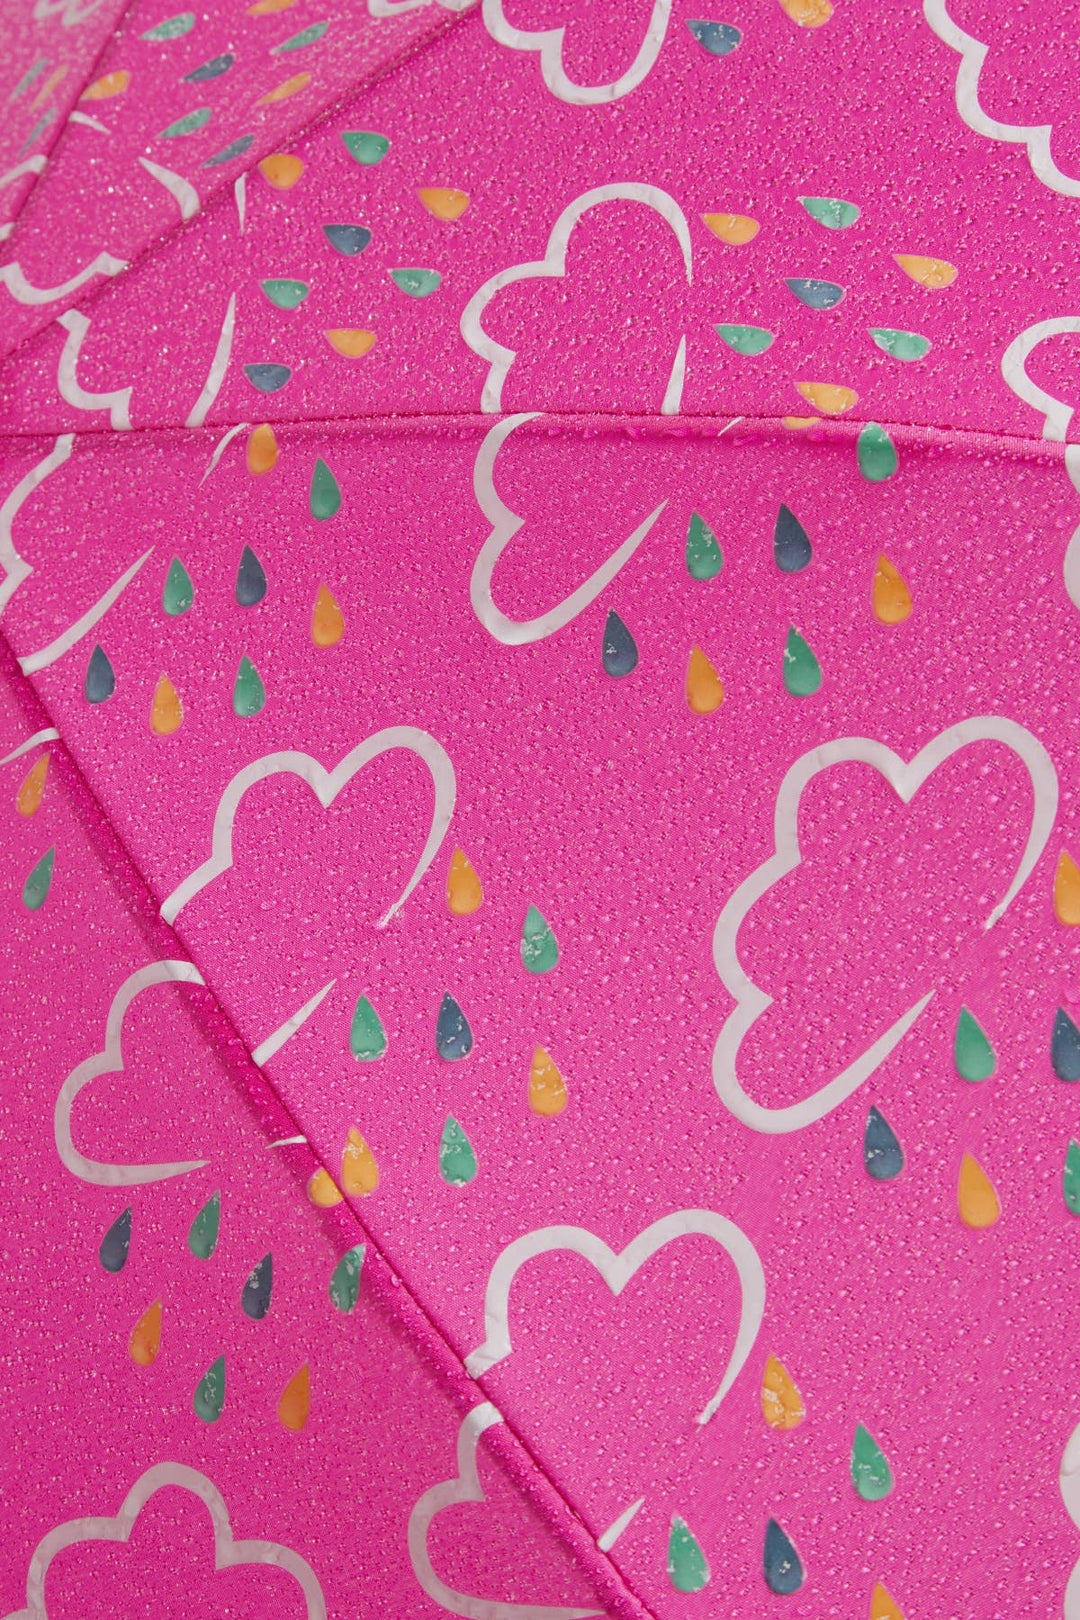 Little Kids Colour-Revealing Umbrella in Orchid Pink